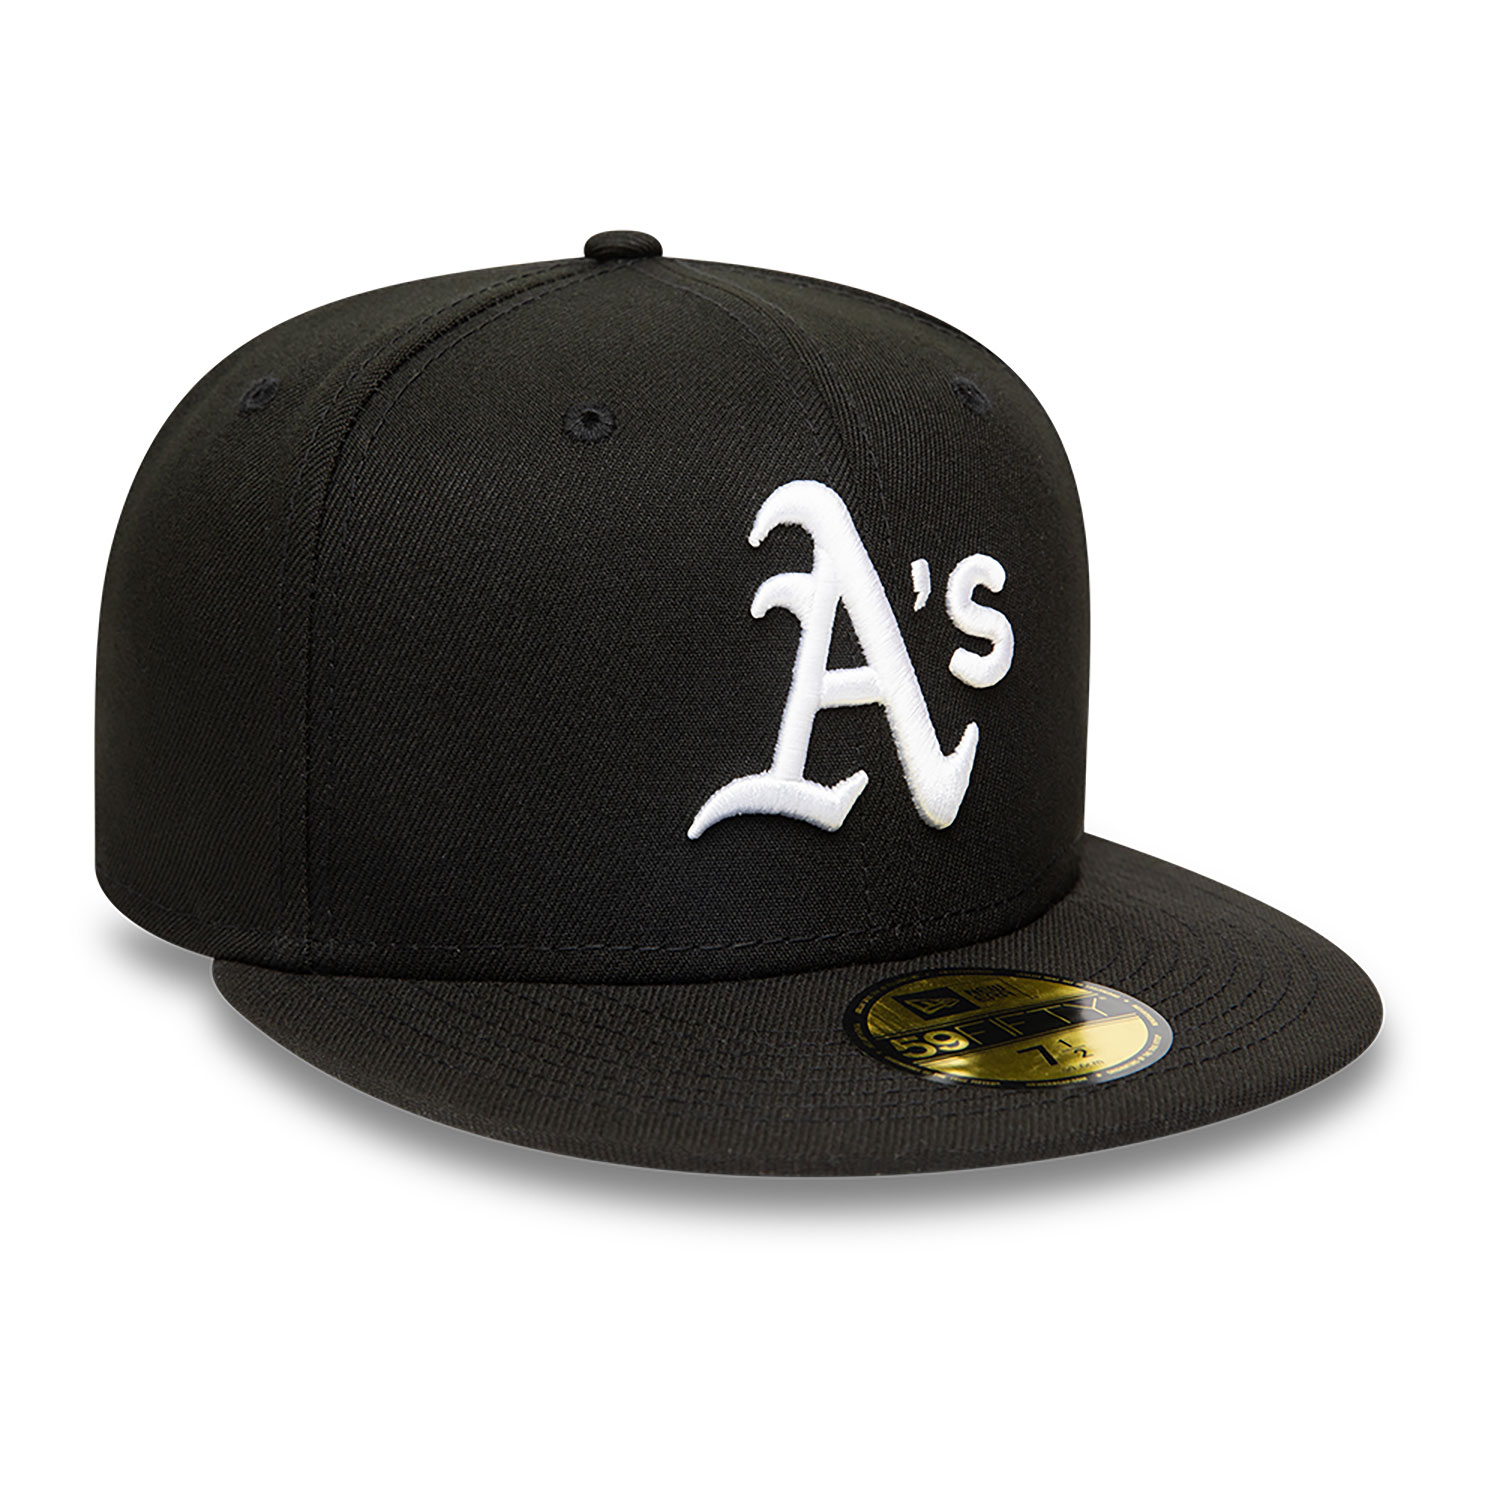 MLB Black White Oakland Athletics 59FIFTY Fitted Cap D02_170